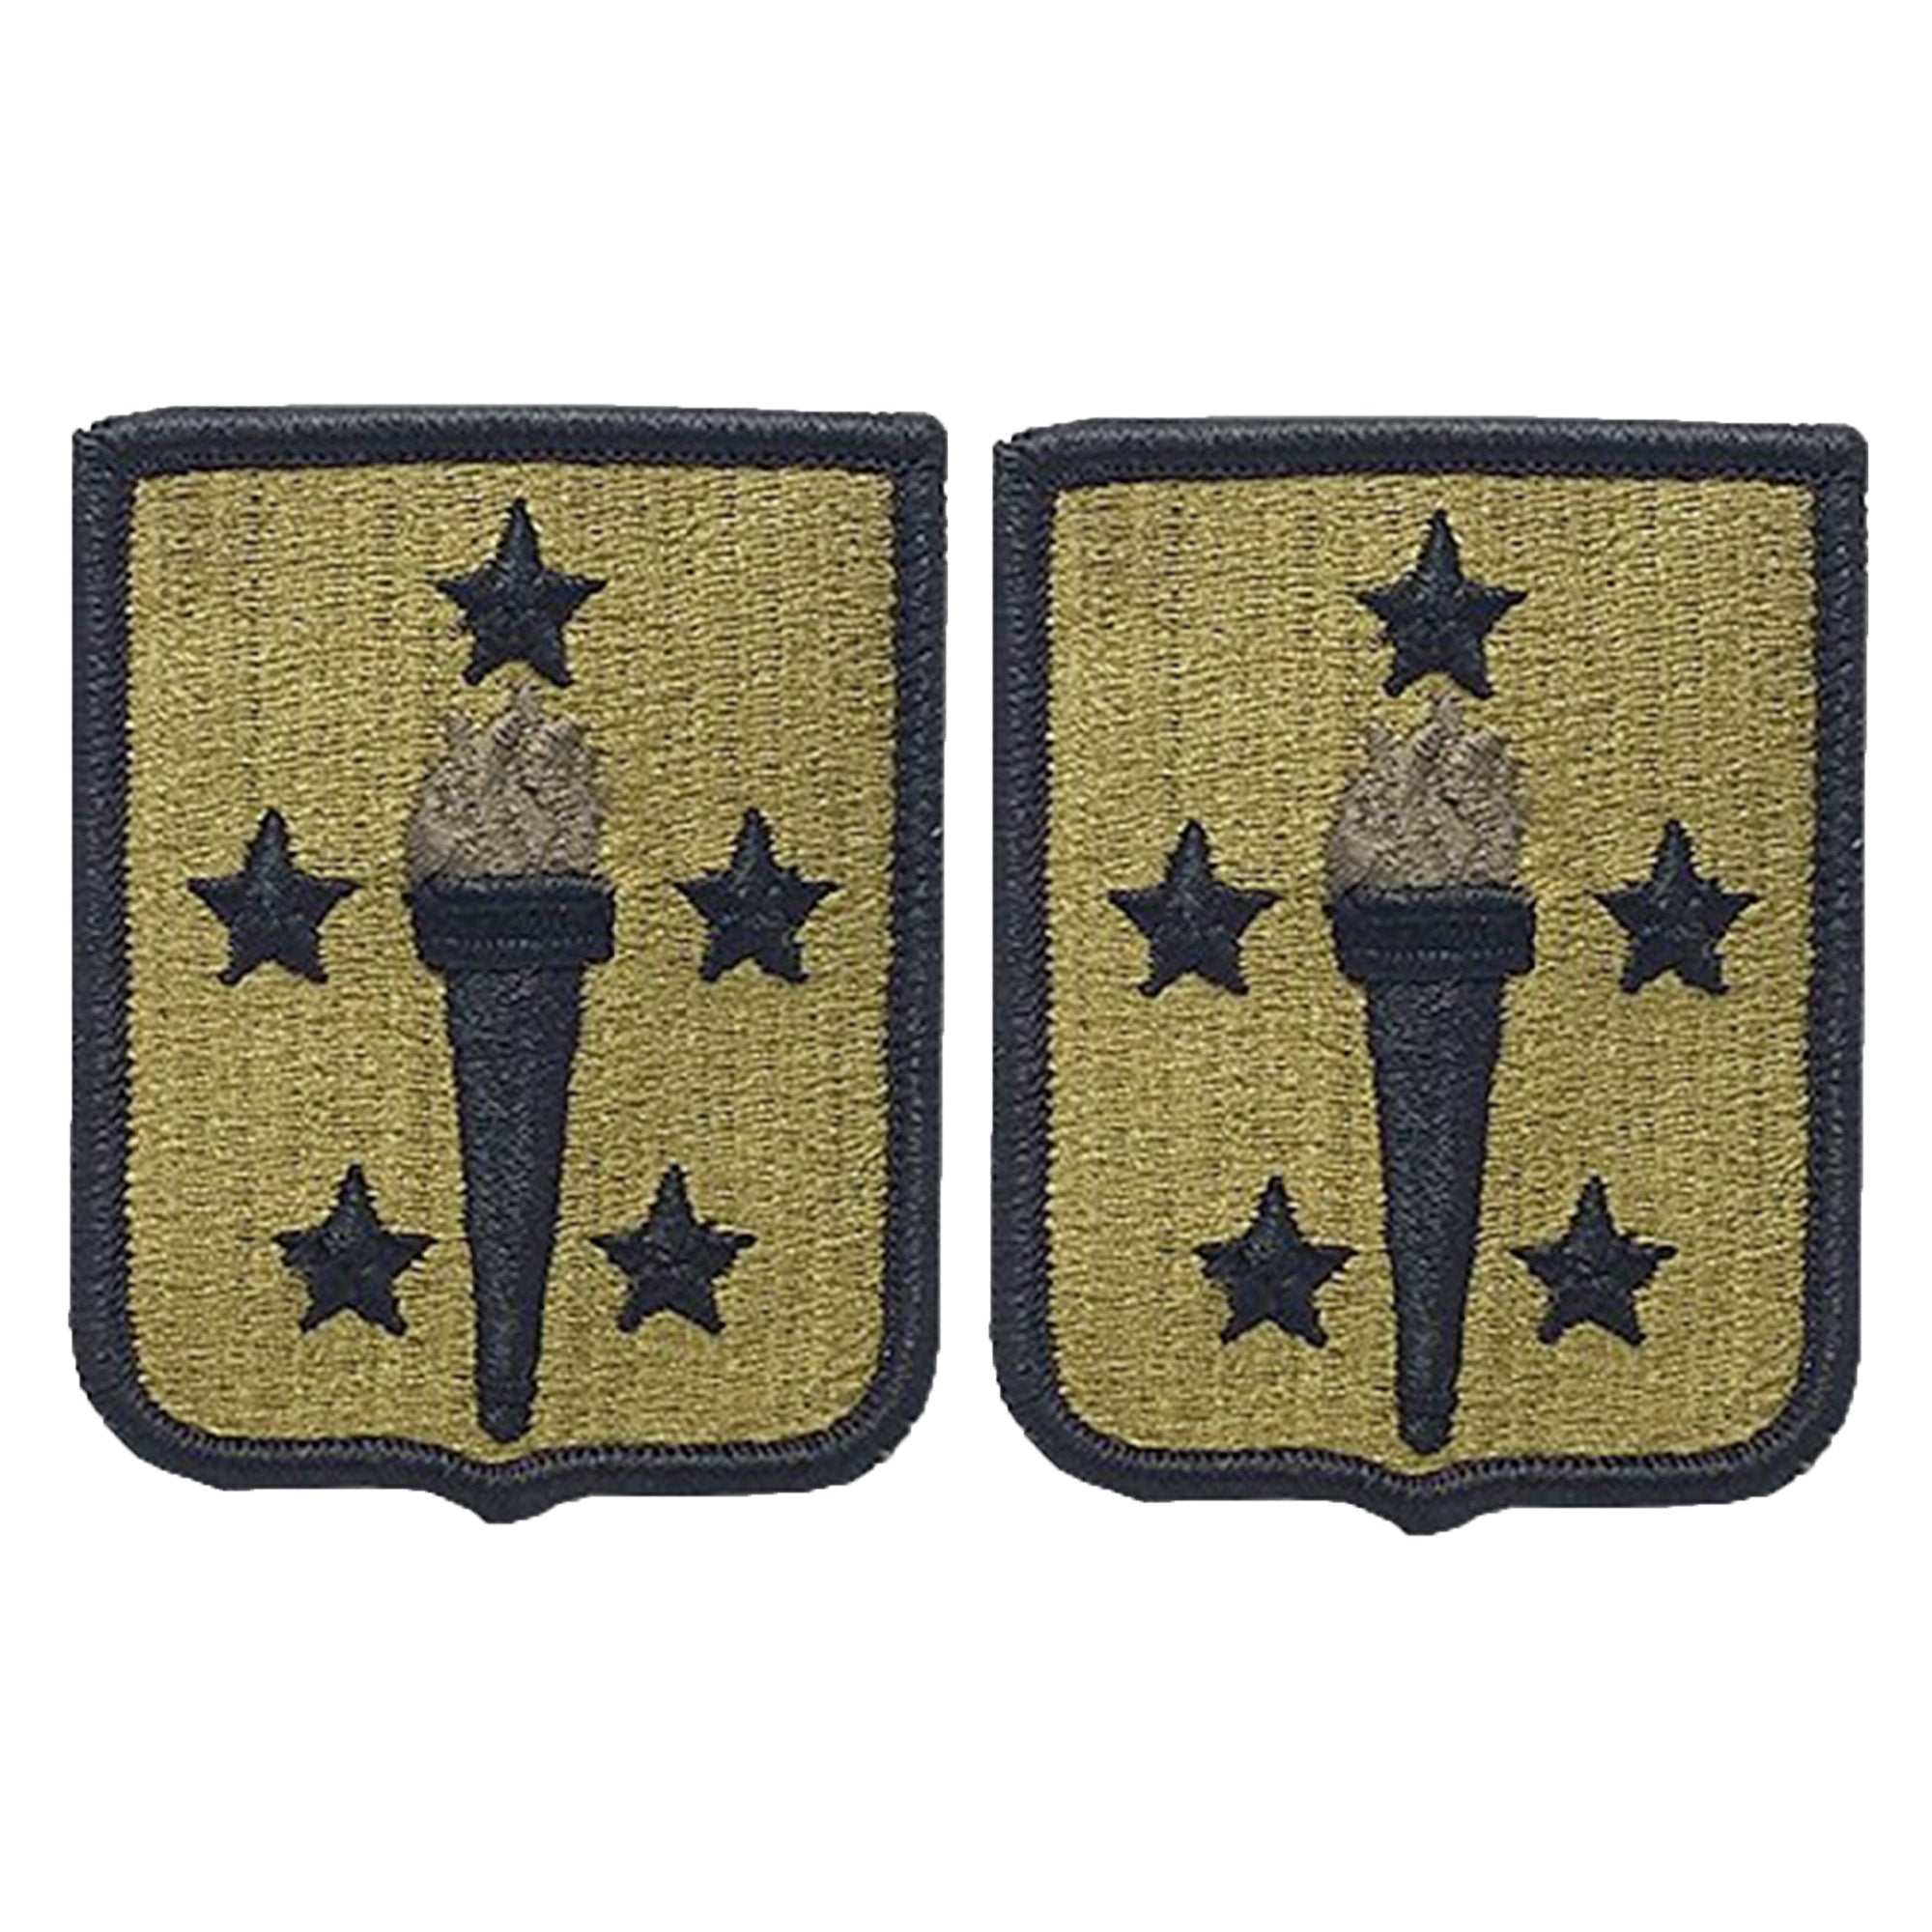 Sustainment Center Of Excellence OCP Patch with Hook Fastener (pair) - Insignia Depot